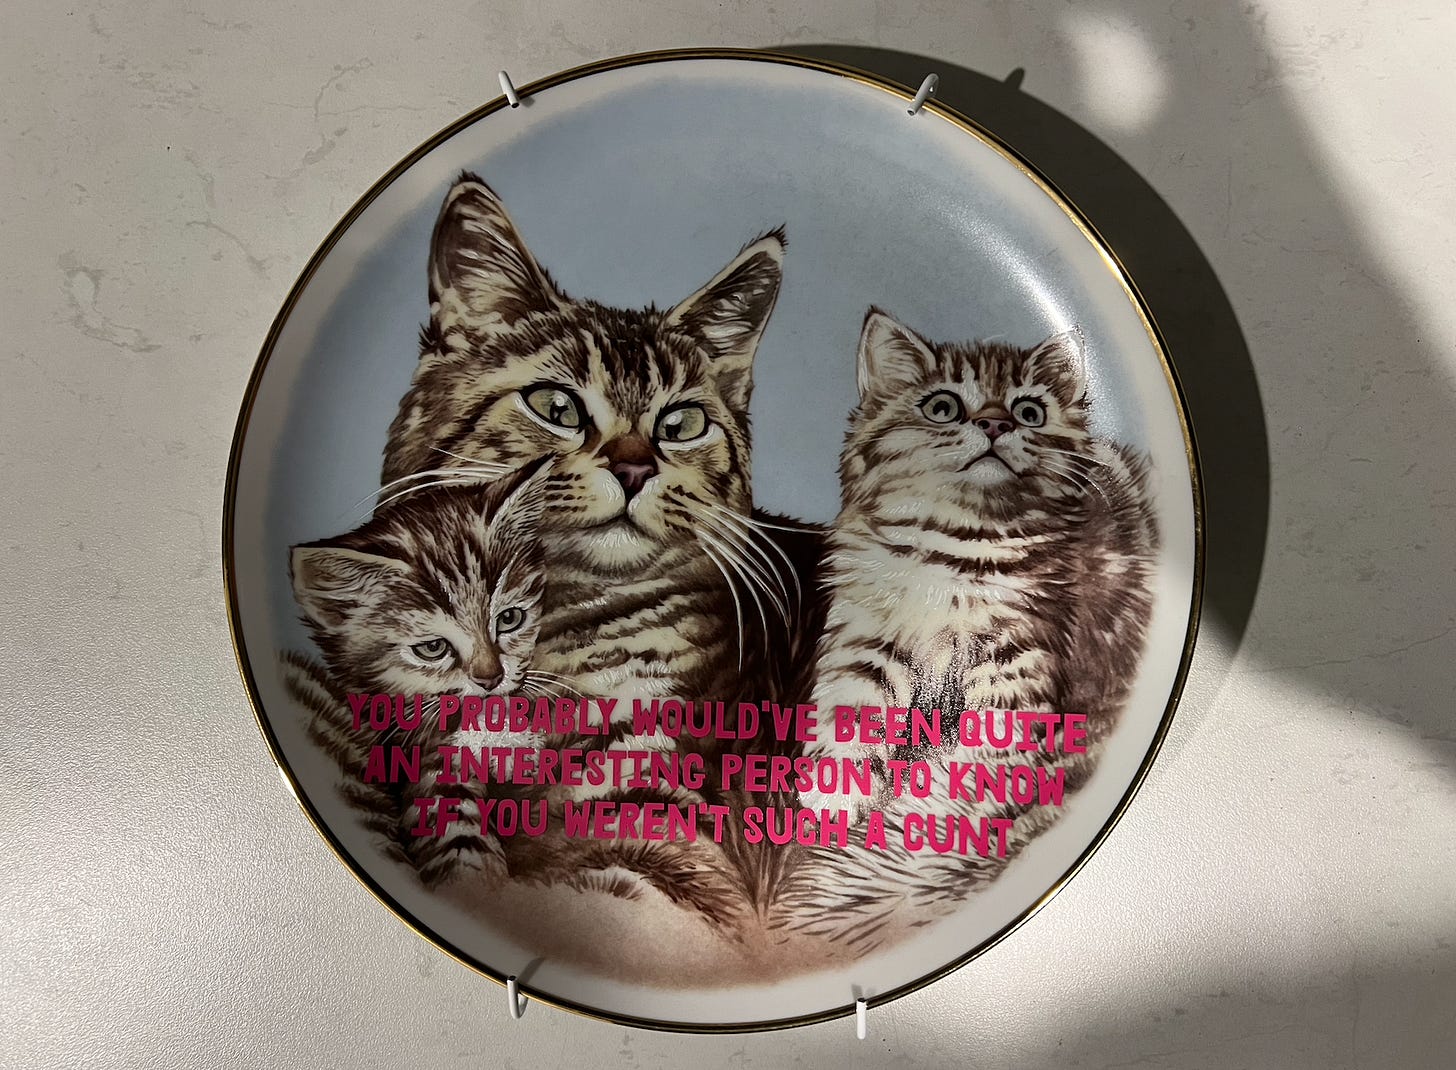 A plate with cats on it, and in pink writing the "CUNT" quite from Michael Organ